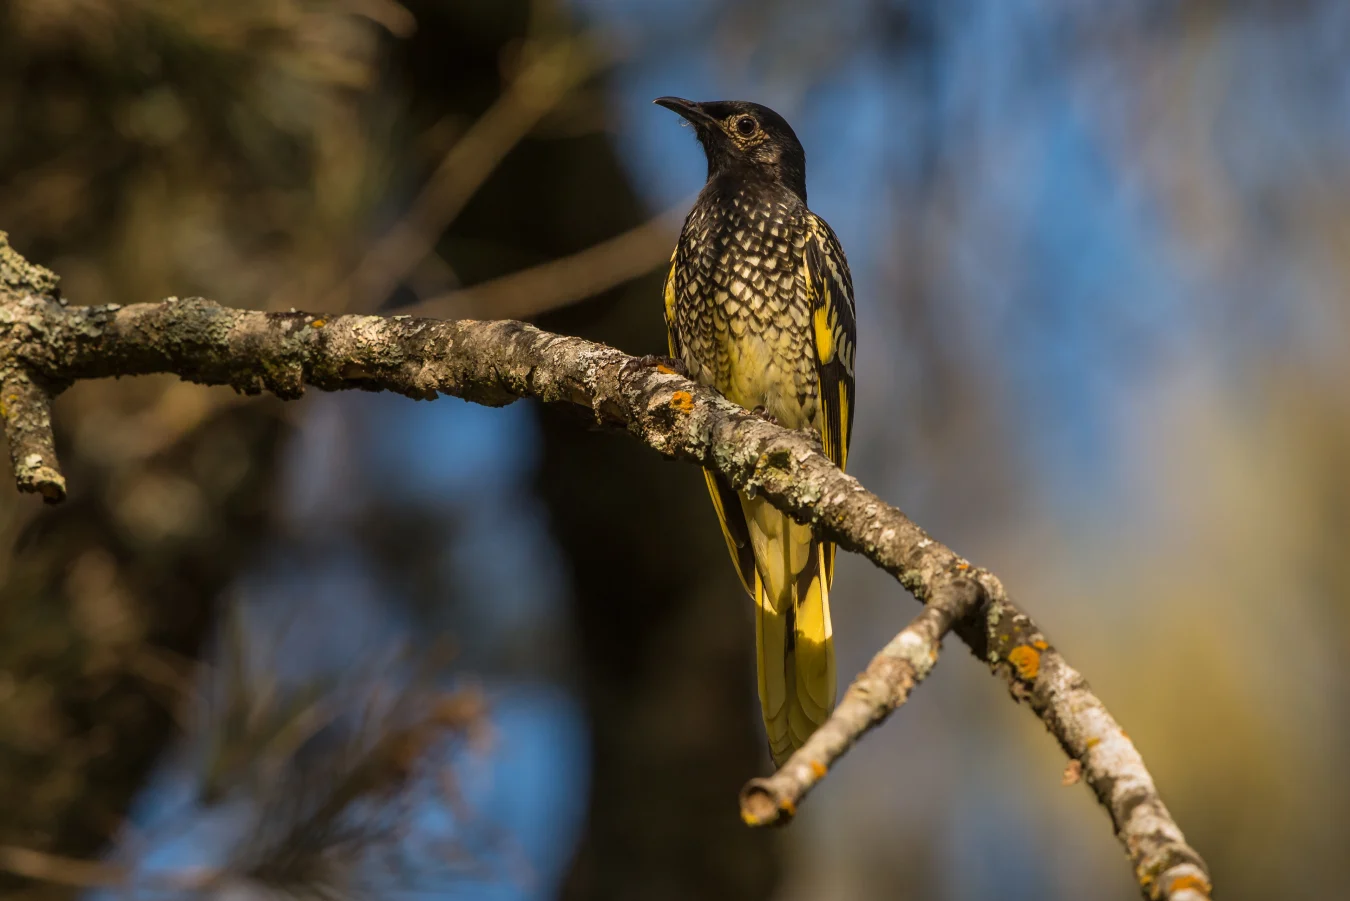 The Regent Honeyeater is one of Australia's numerous critically endangered animals and our version of the Passenger Pigeon. They were once found in vast flocks but have dwindled to around 100 birds (or fewer).